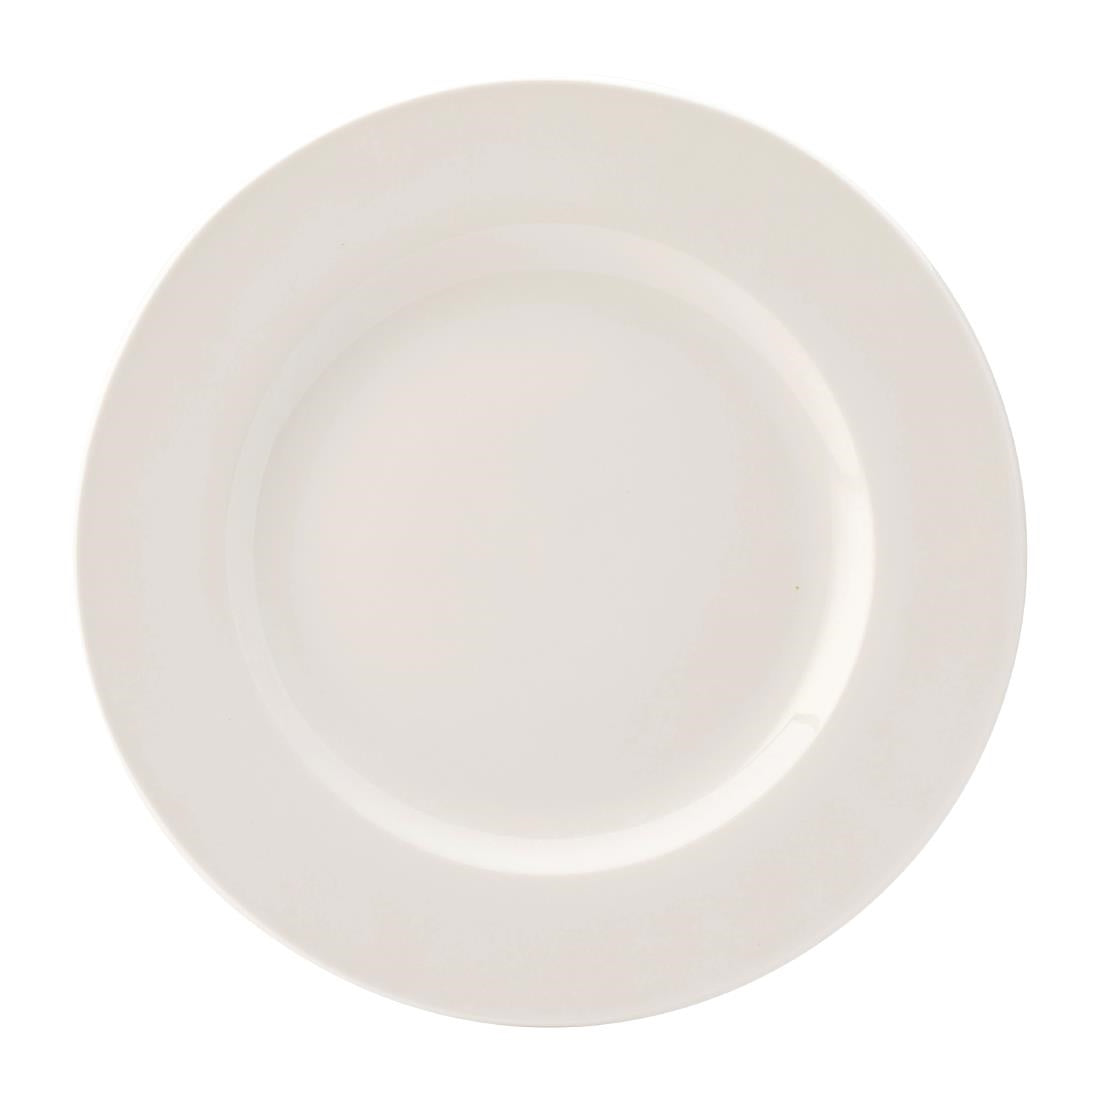 DY314 Utopia Pure White Wide Rim Plates 270mm (Pack of 18)